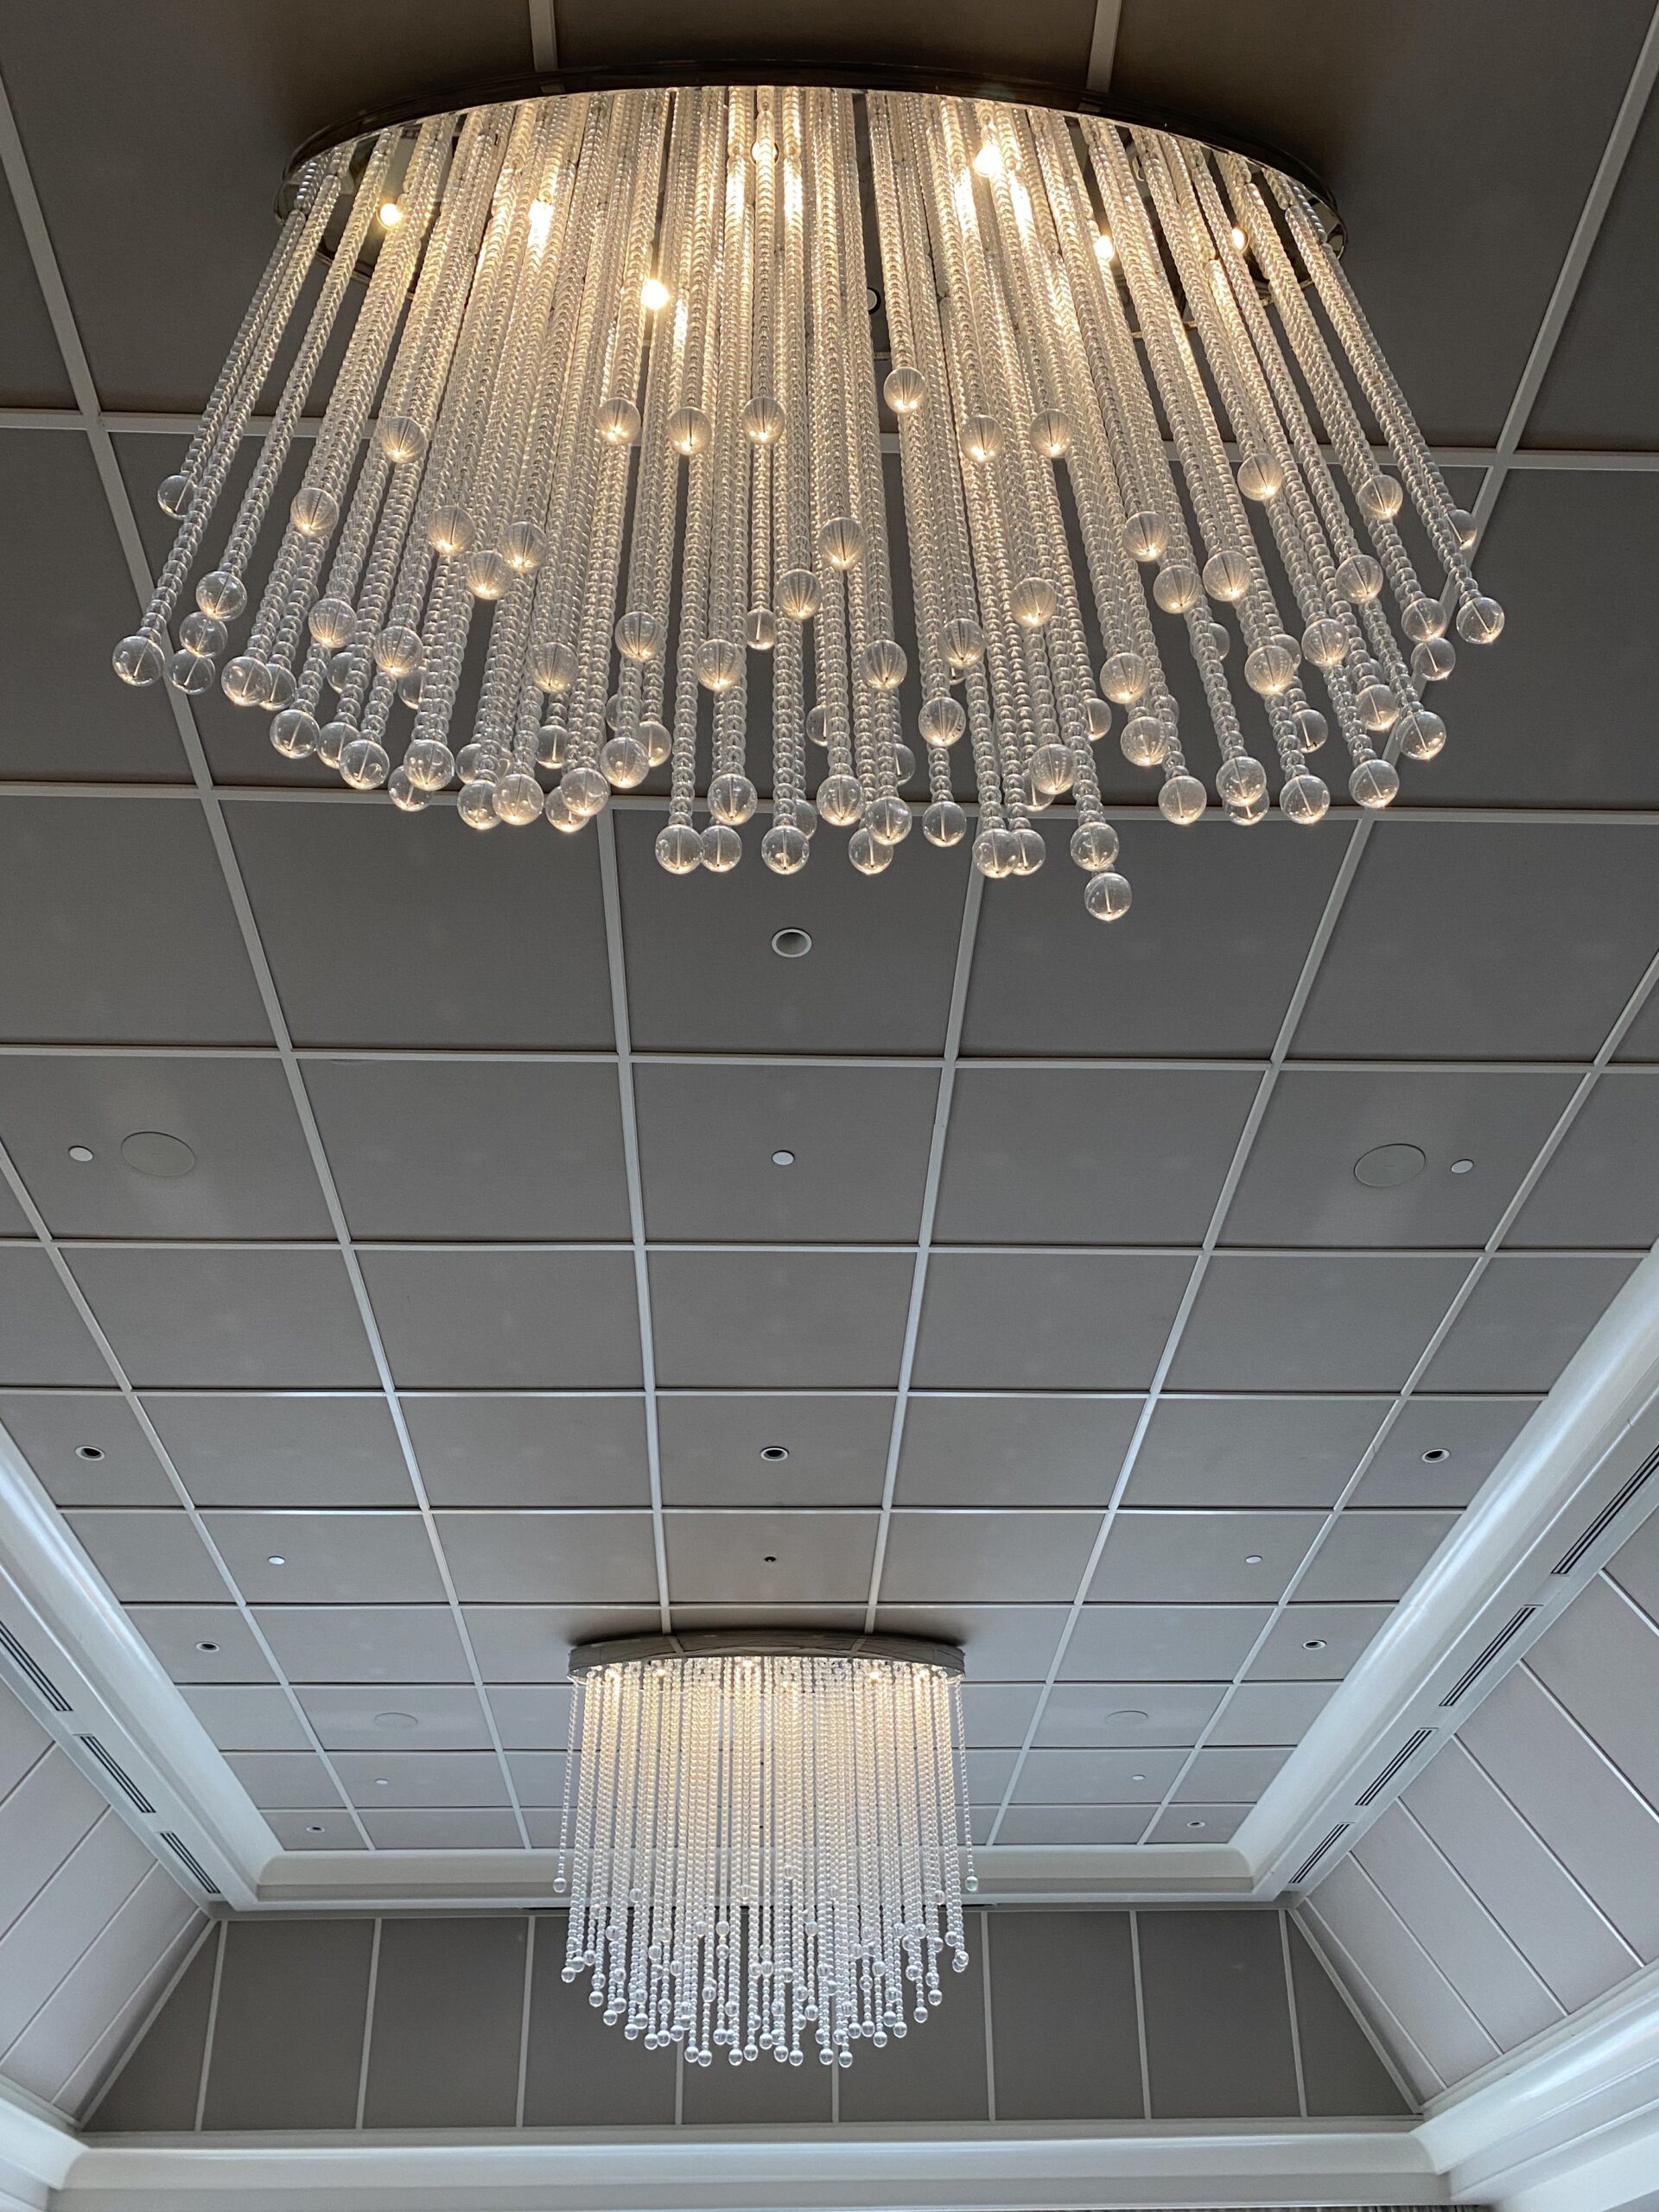 We saw modern chandeliers during an Edgewood Country Club tour.